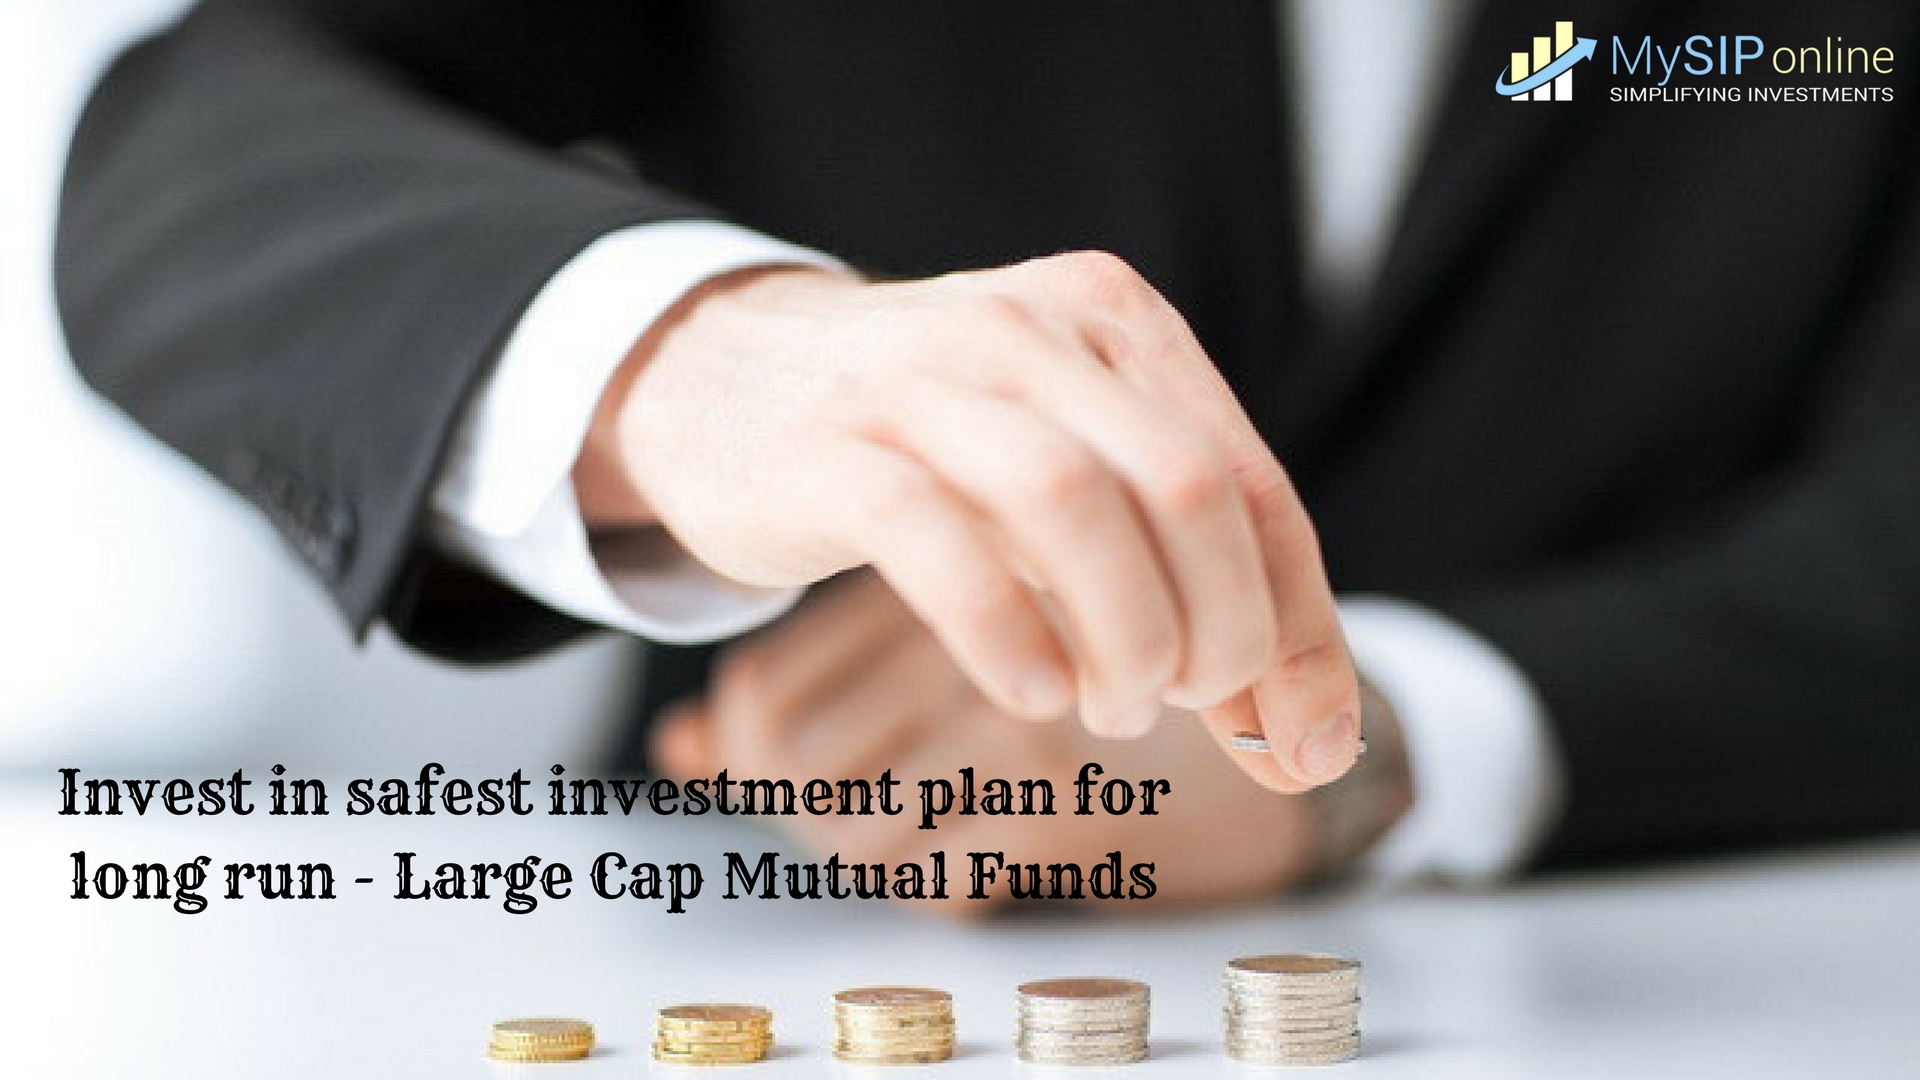 Large Cap Mutual Funds Plan For Long Term Investments Gifyu